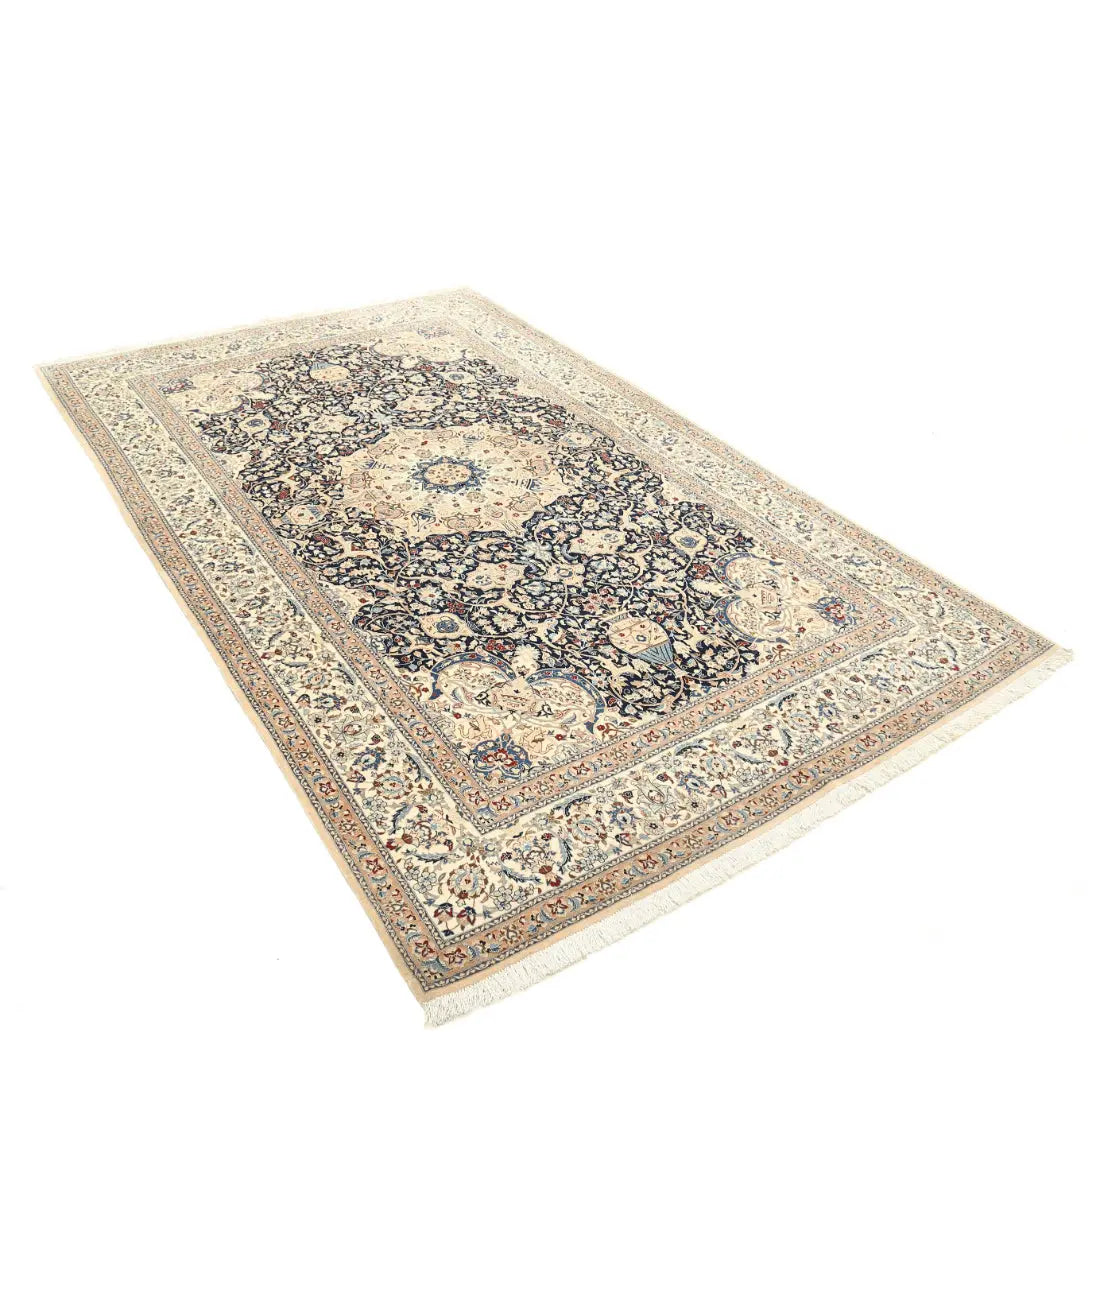 Hand Knotted Masterpiece Persian Nain Wool Rug - 5'9'' x 9'1'' - Arteverk Rugs Area rug